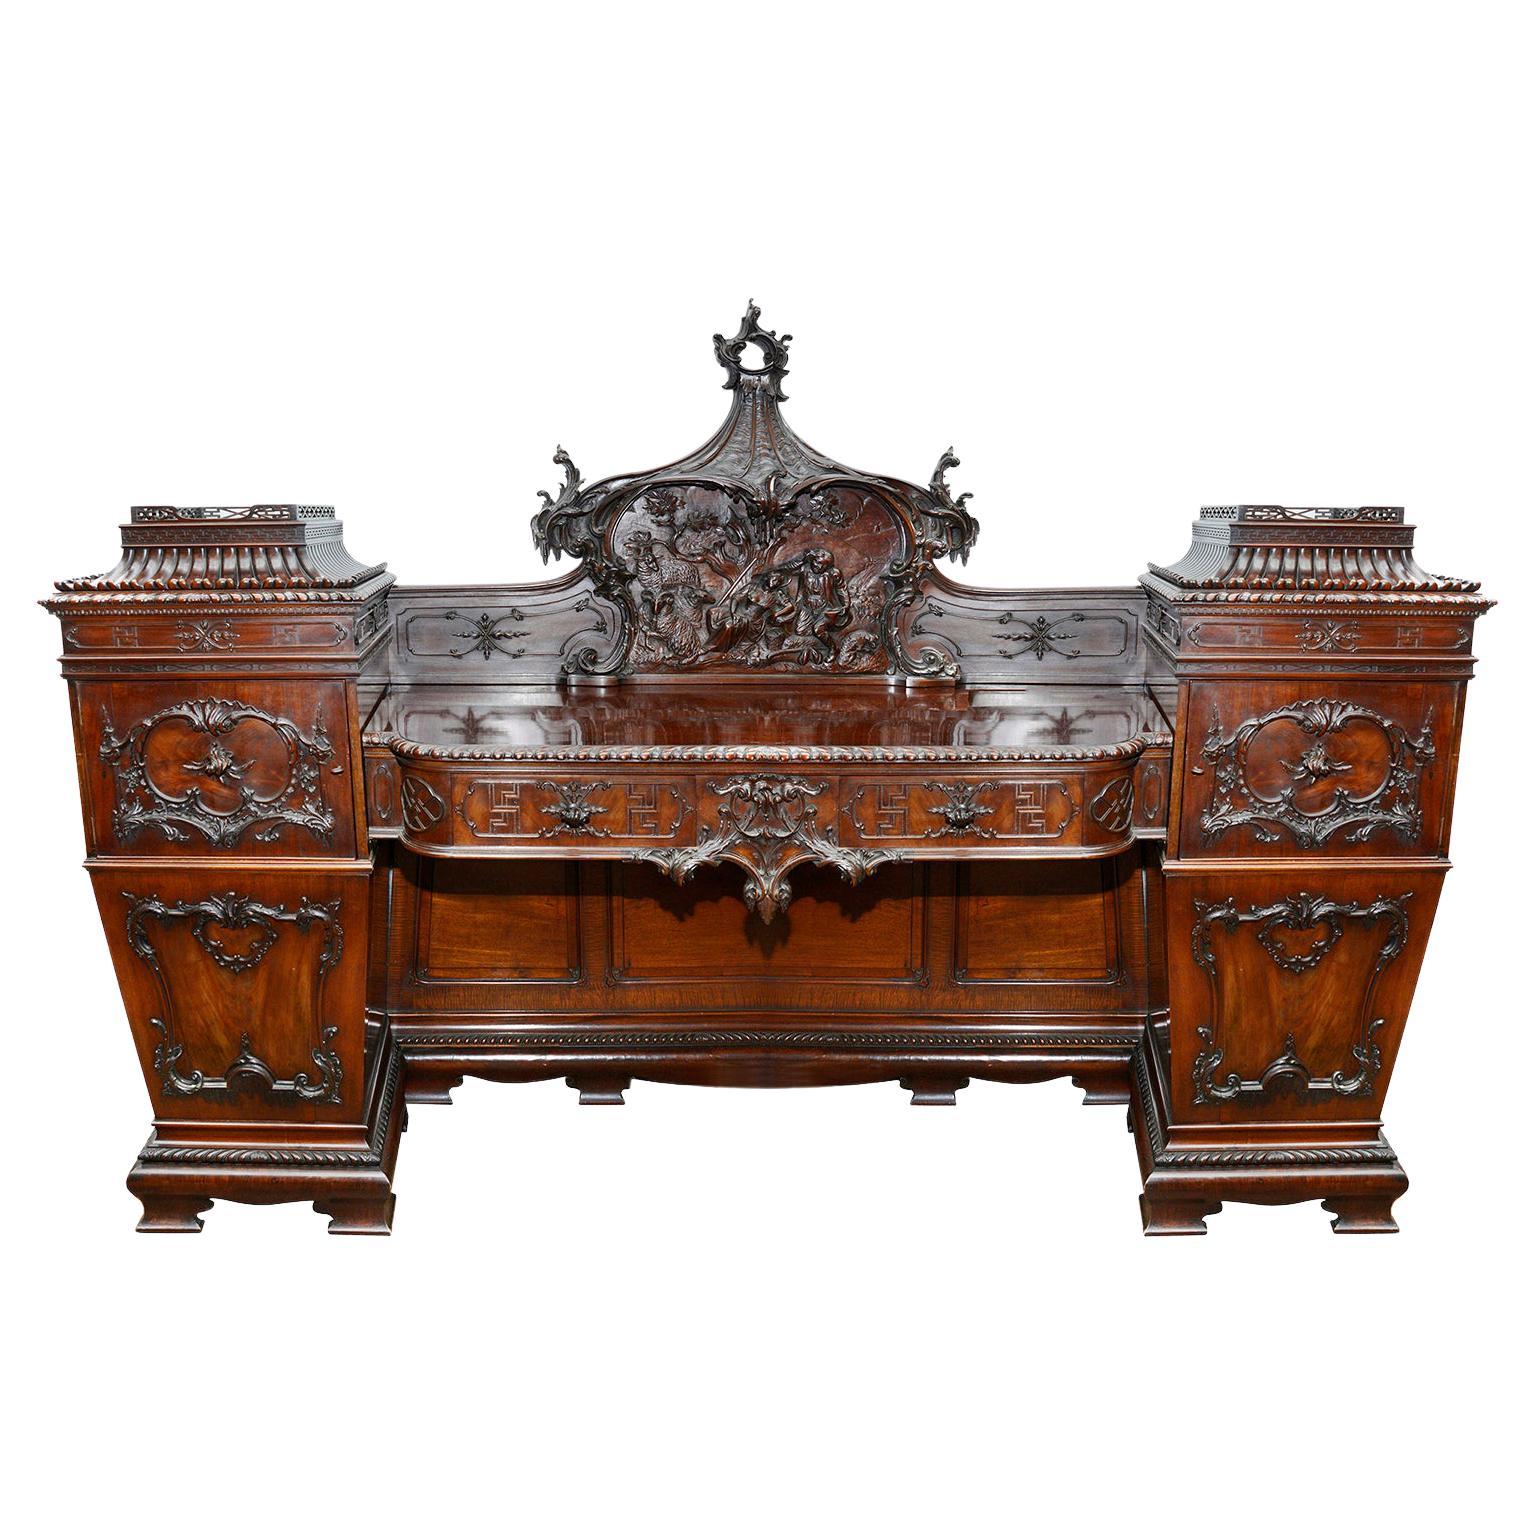 19th Century Chinese Chippendale influenced sideboard.